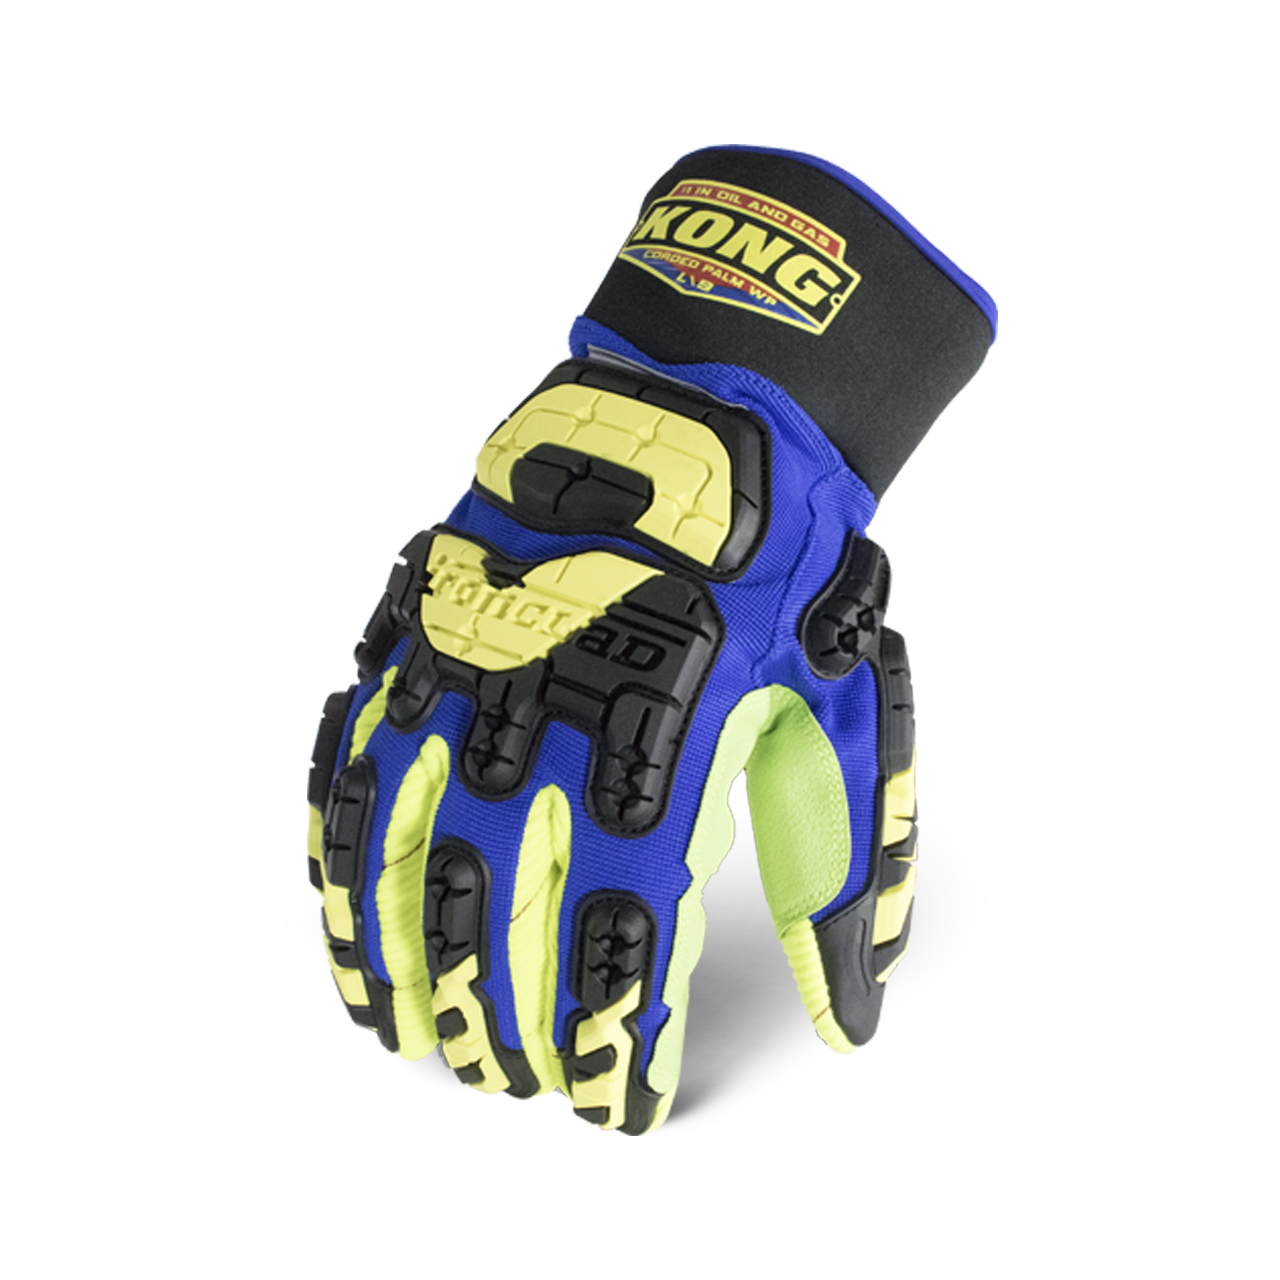 KONG® COTTON CORDED WATERPROOF IVE™ Impact Gloves - Spill Control